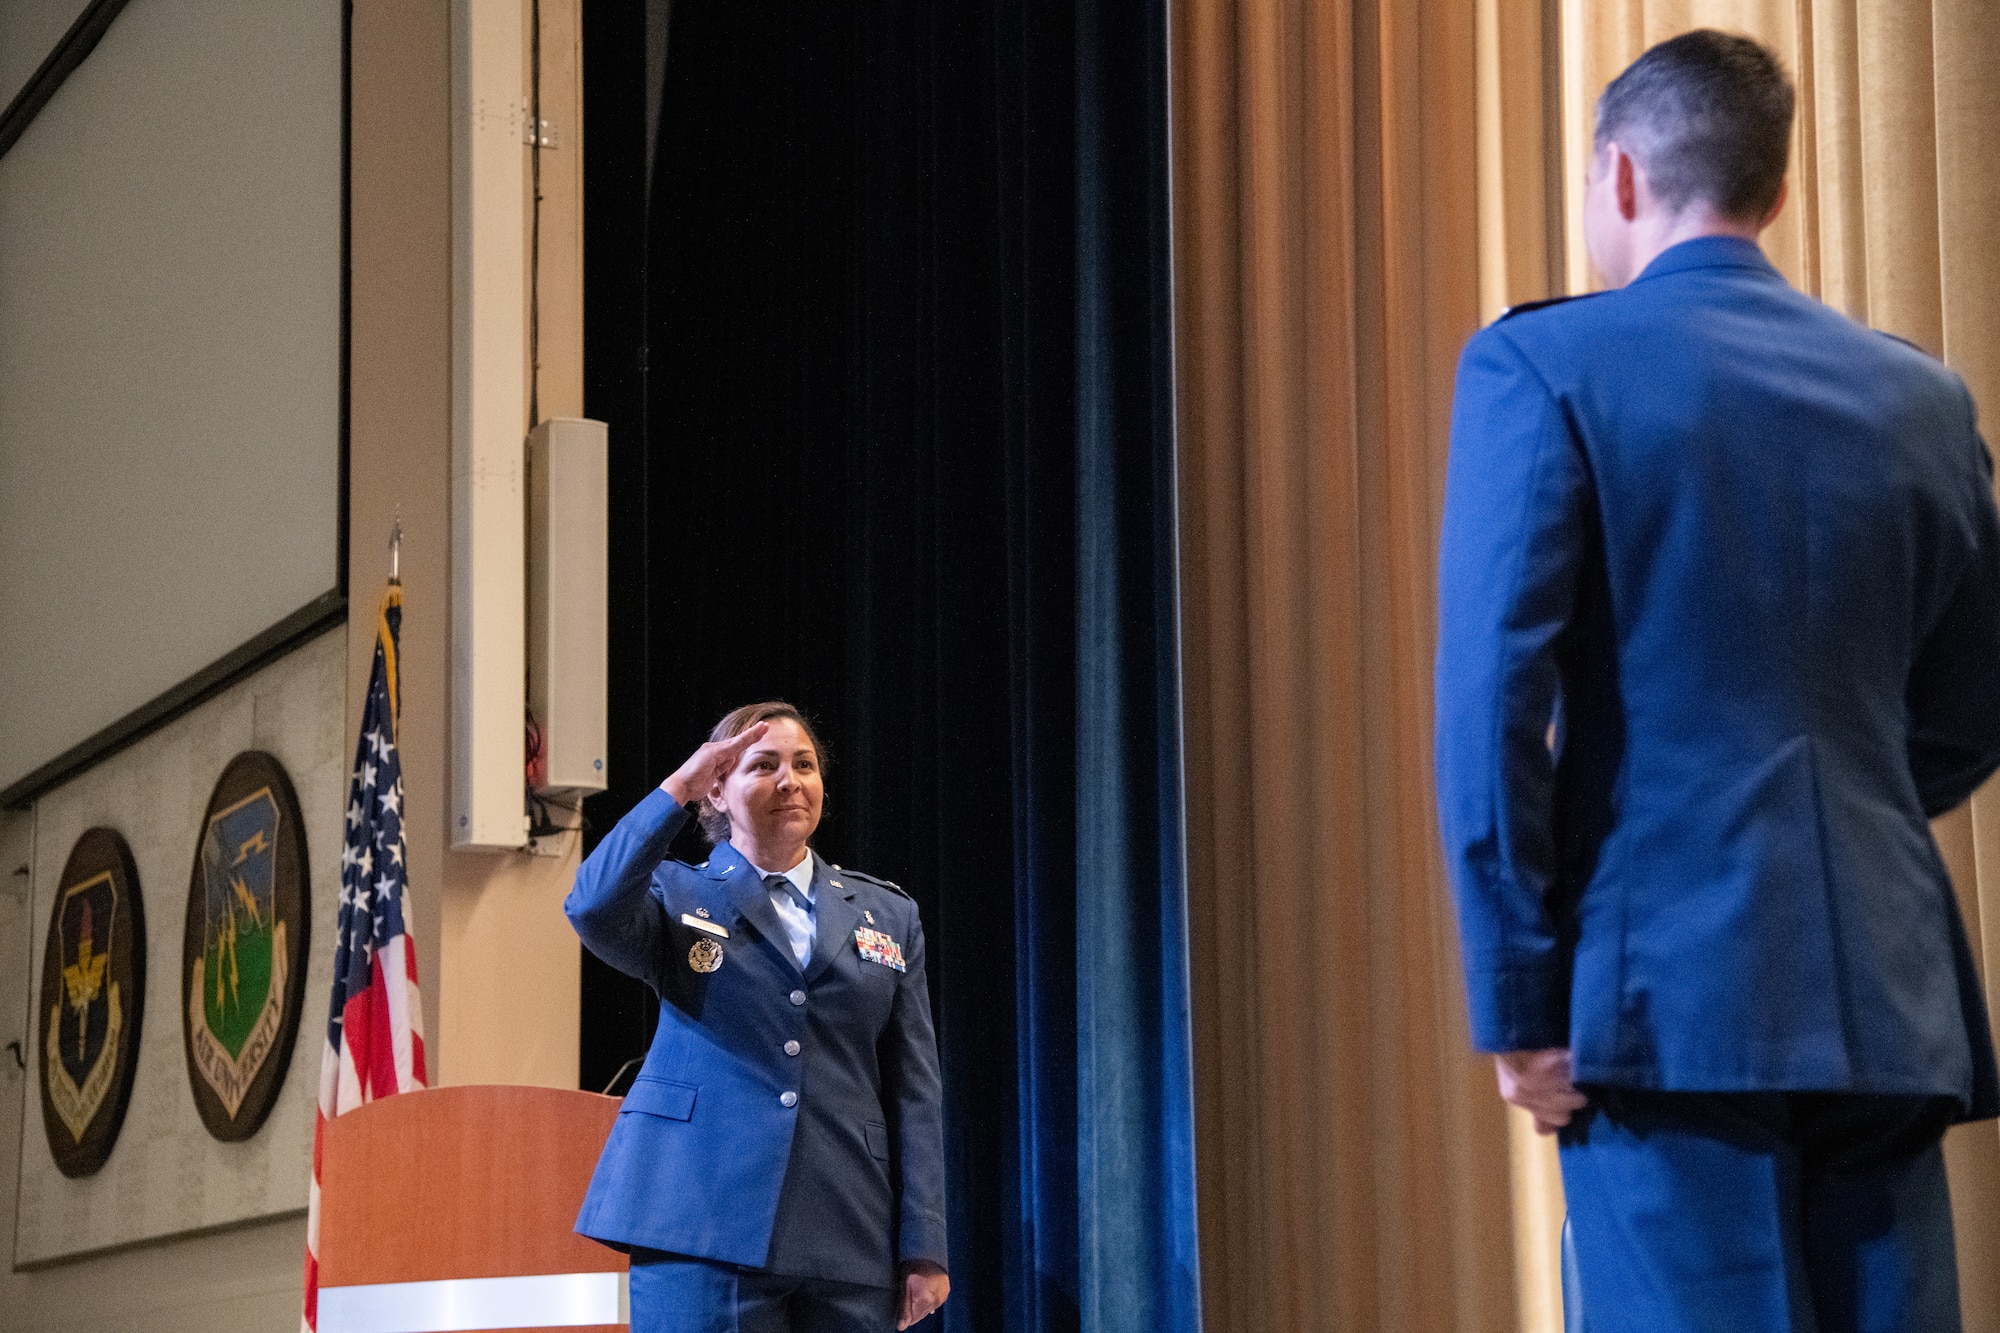 U.S. Air Force Col. Zoya Lee-Zerkel salutes Col. Patrick Carley during a change of command ceremony July 1, 2020,Maxwell Air Force Base, Alabama. Lee-Zerkel is taking over command of the 42nd Medical Group after serving as commander of the 86th Medical Group Expeditionary Medical Support stationed on Ramstein Air Base, Germany. (U.S. Air Force photo by William Birchfield)